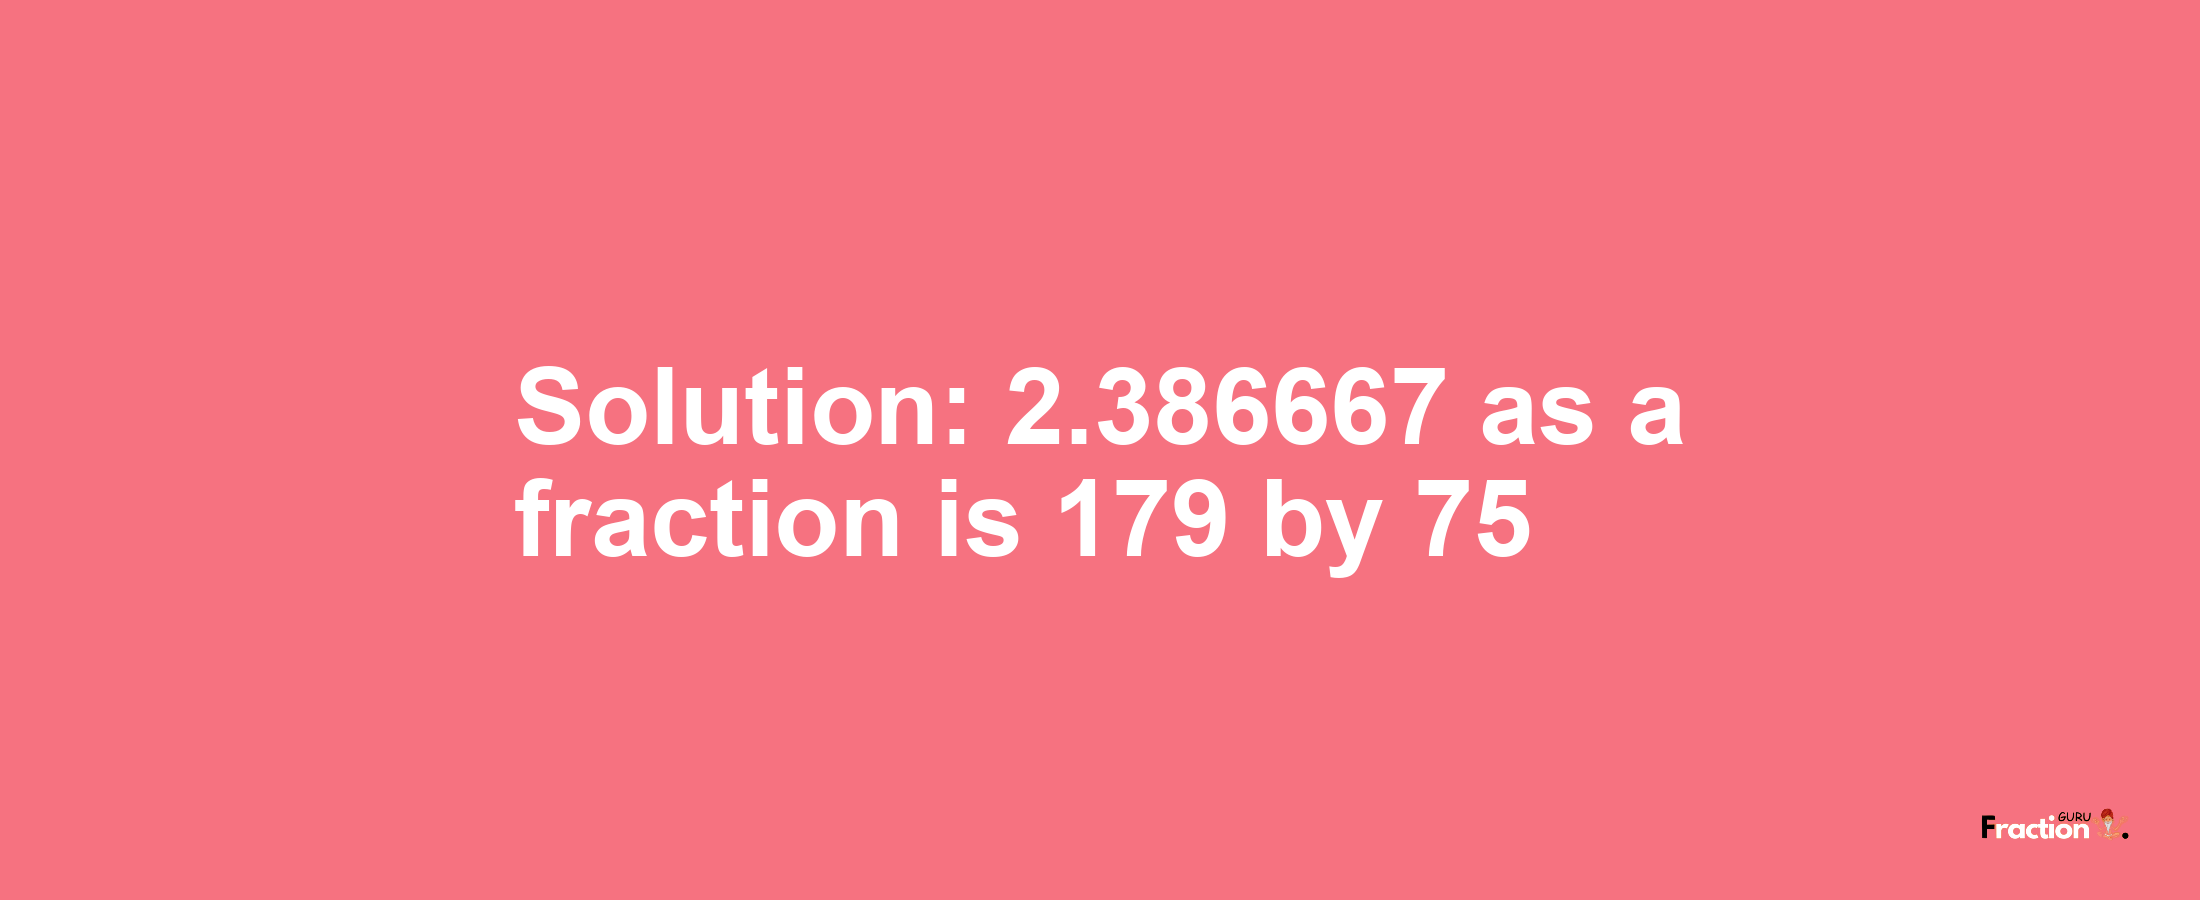 Solution:2.386667 as a fraction is 179/75